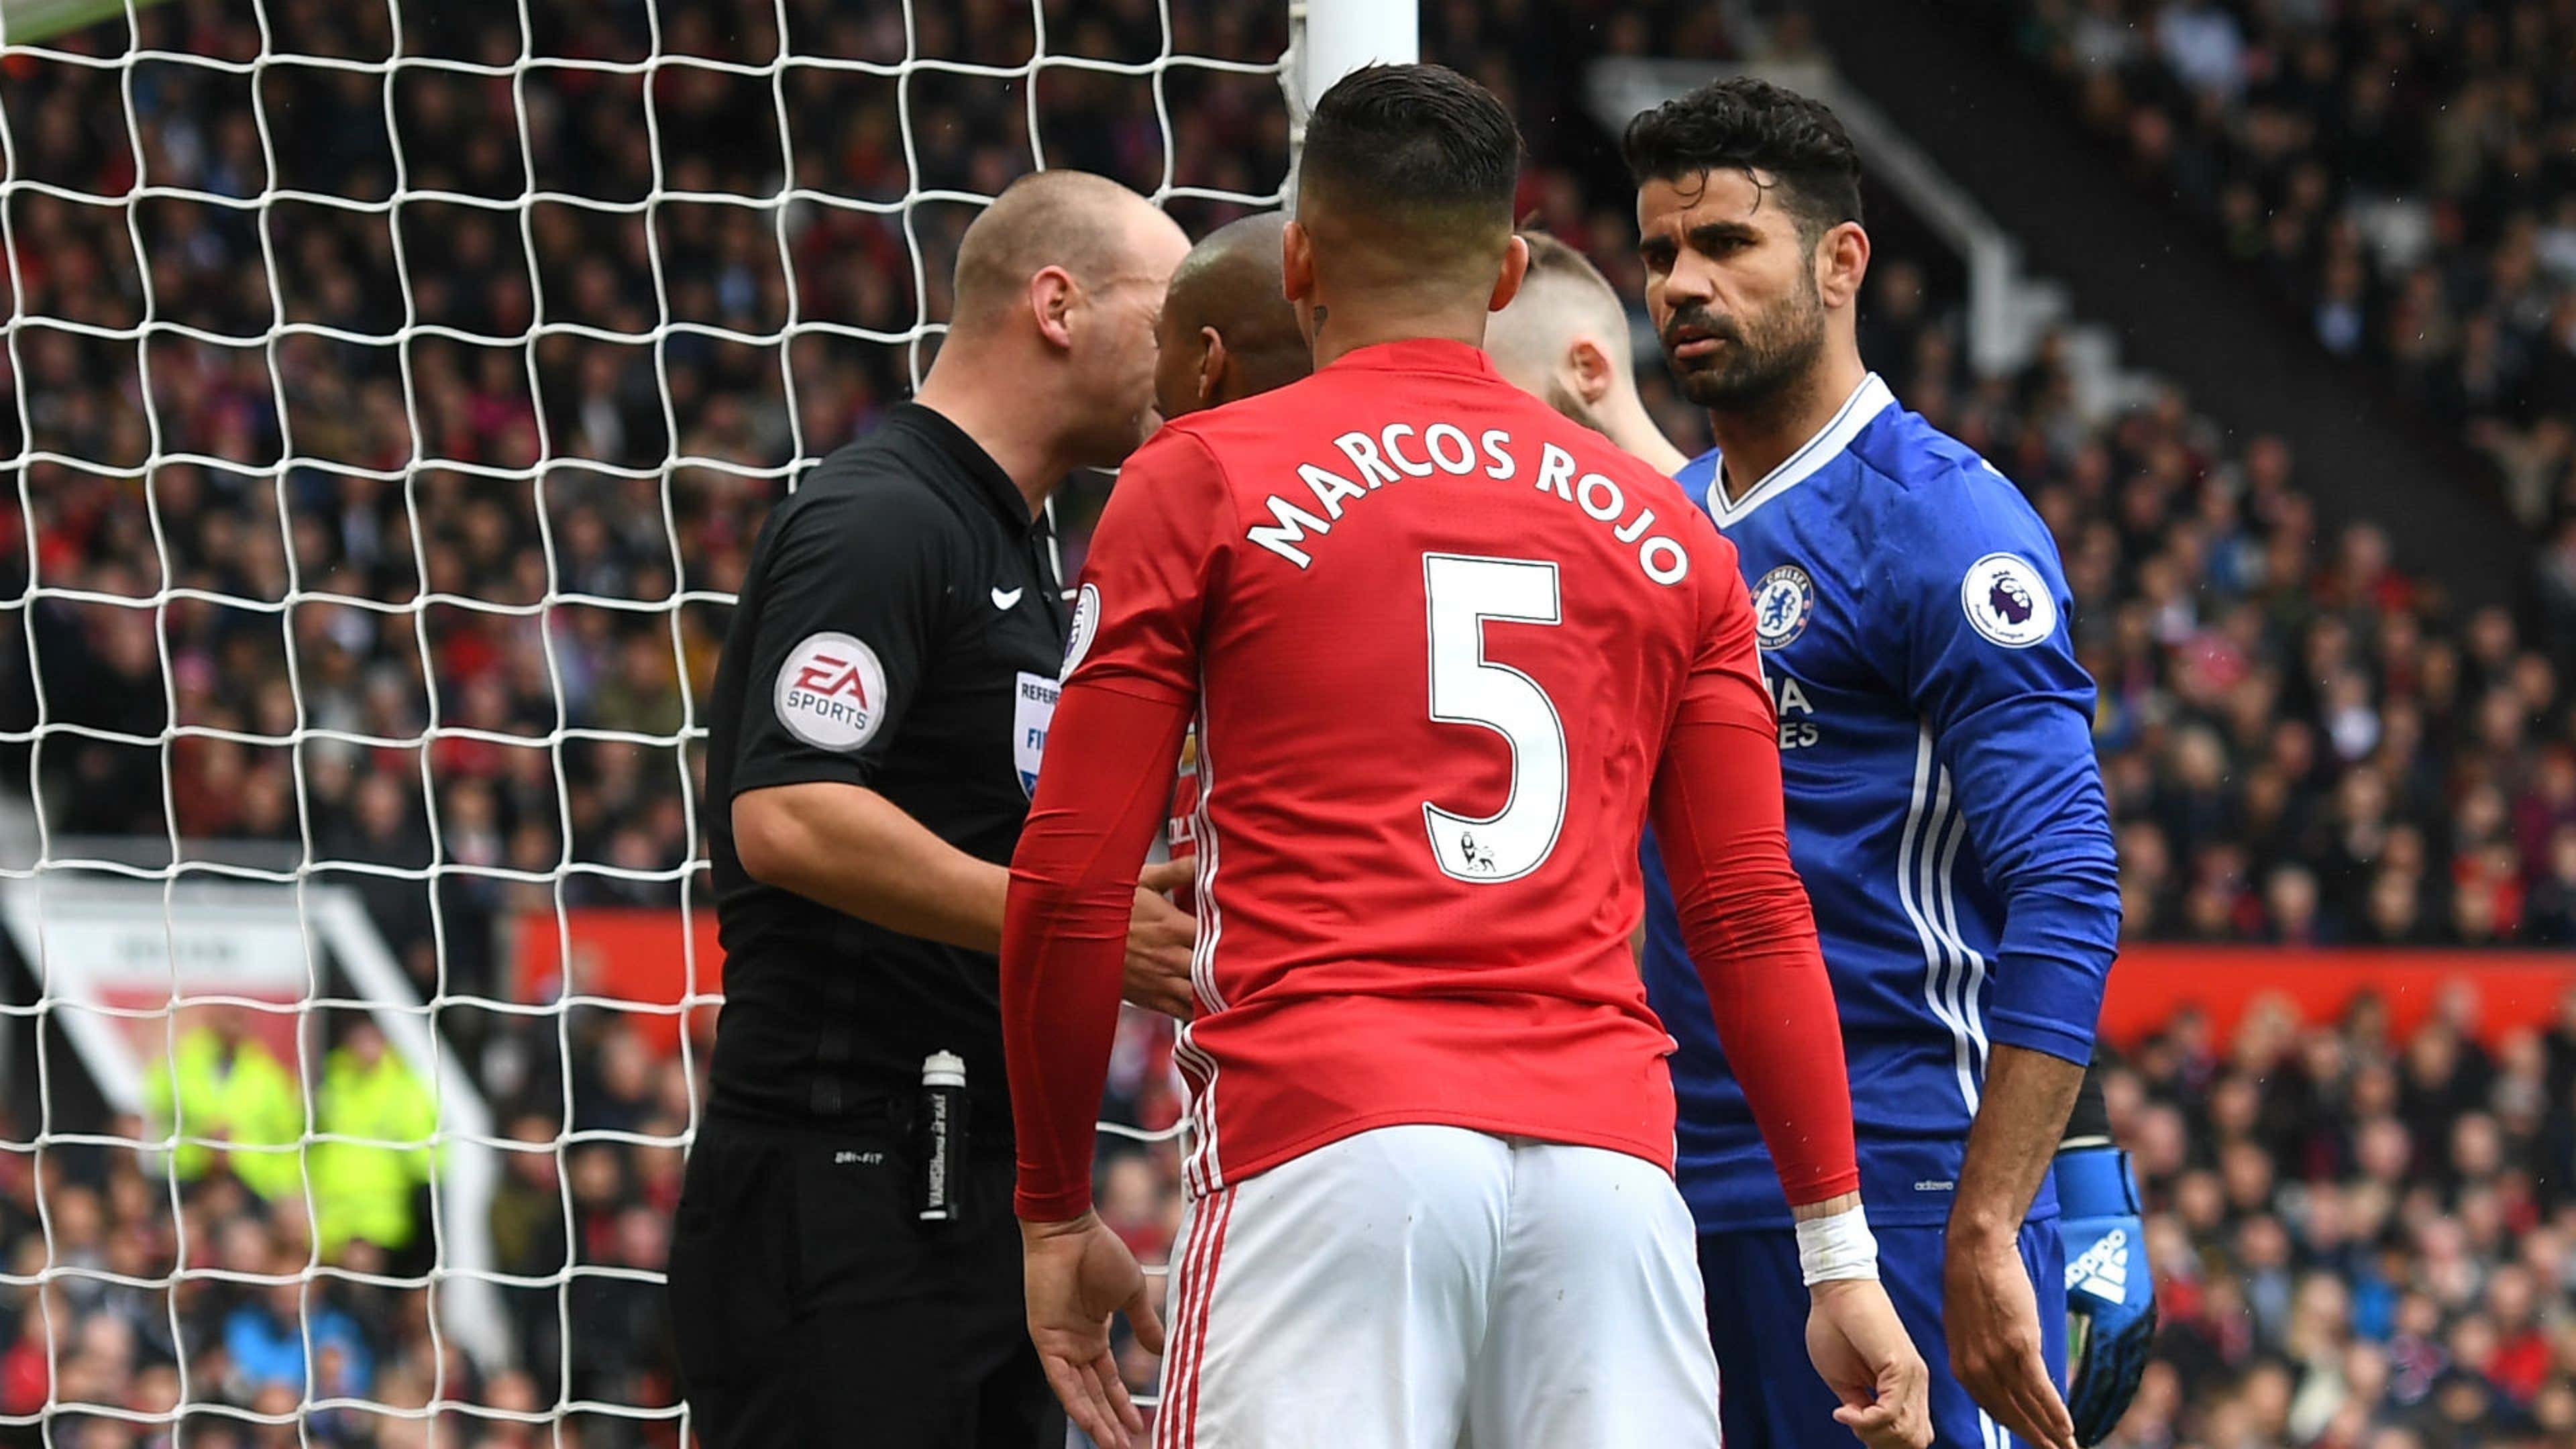 HD Diego Costa Marcos Rojo Chelsea Manchester United